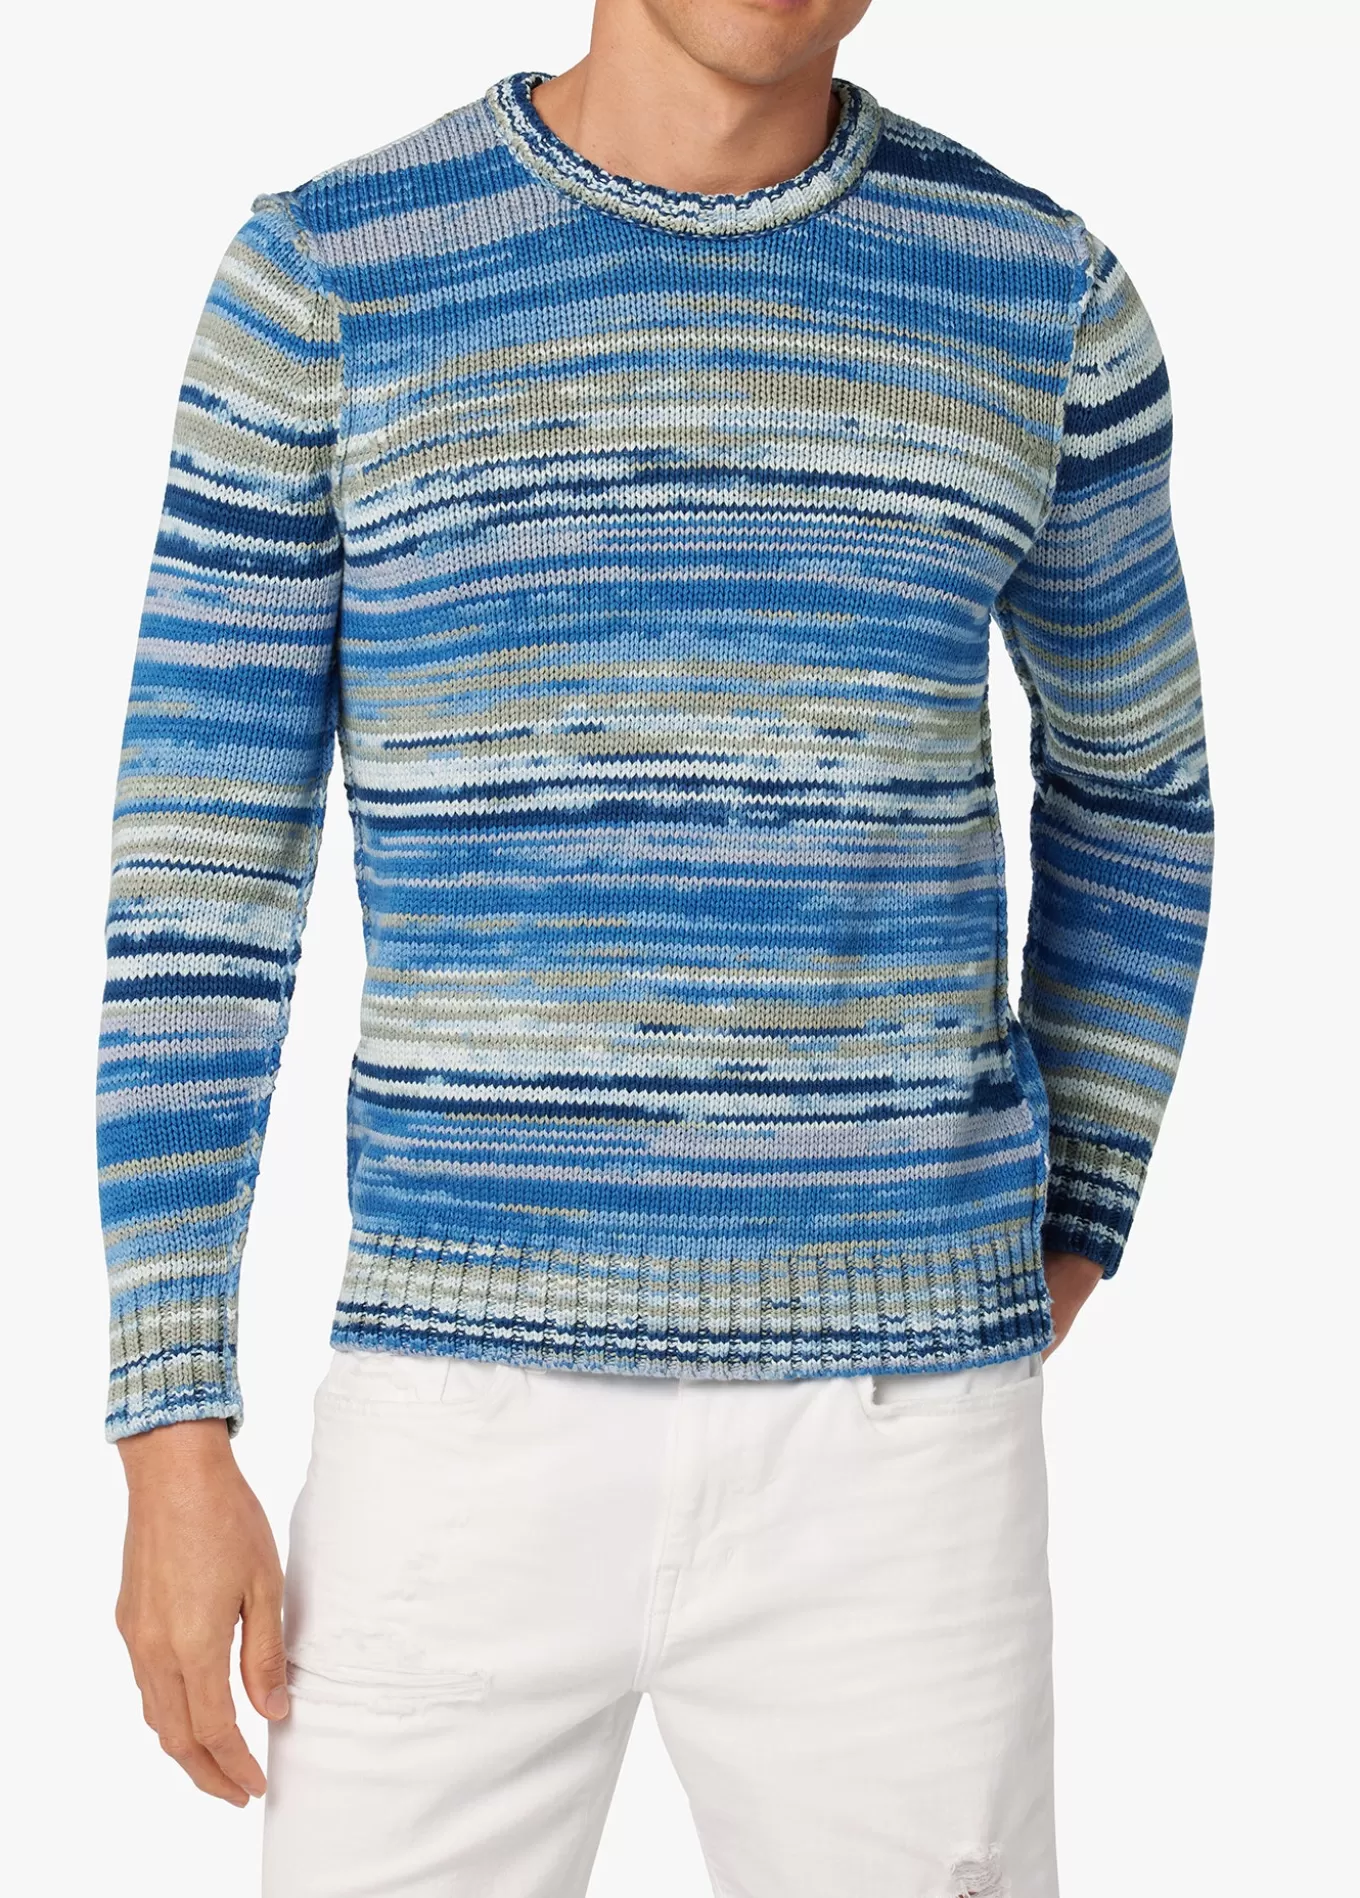 SPACE-DYED SWEATER>Joe’s Jeans Fashion